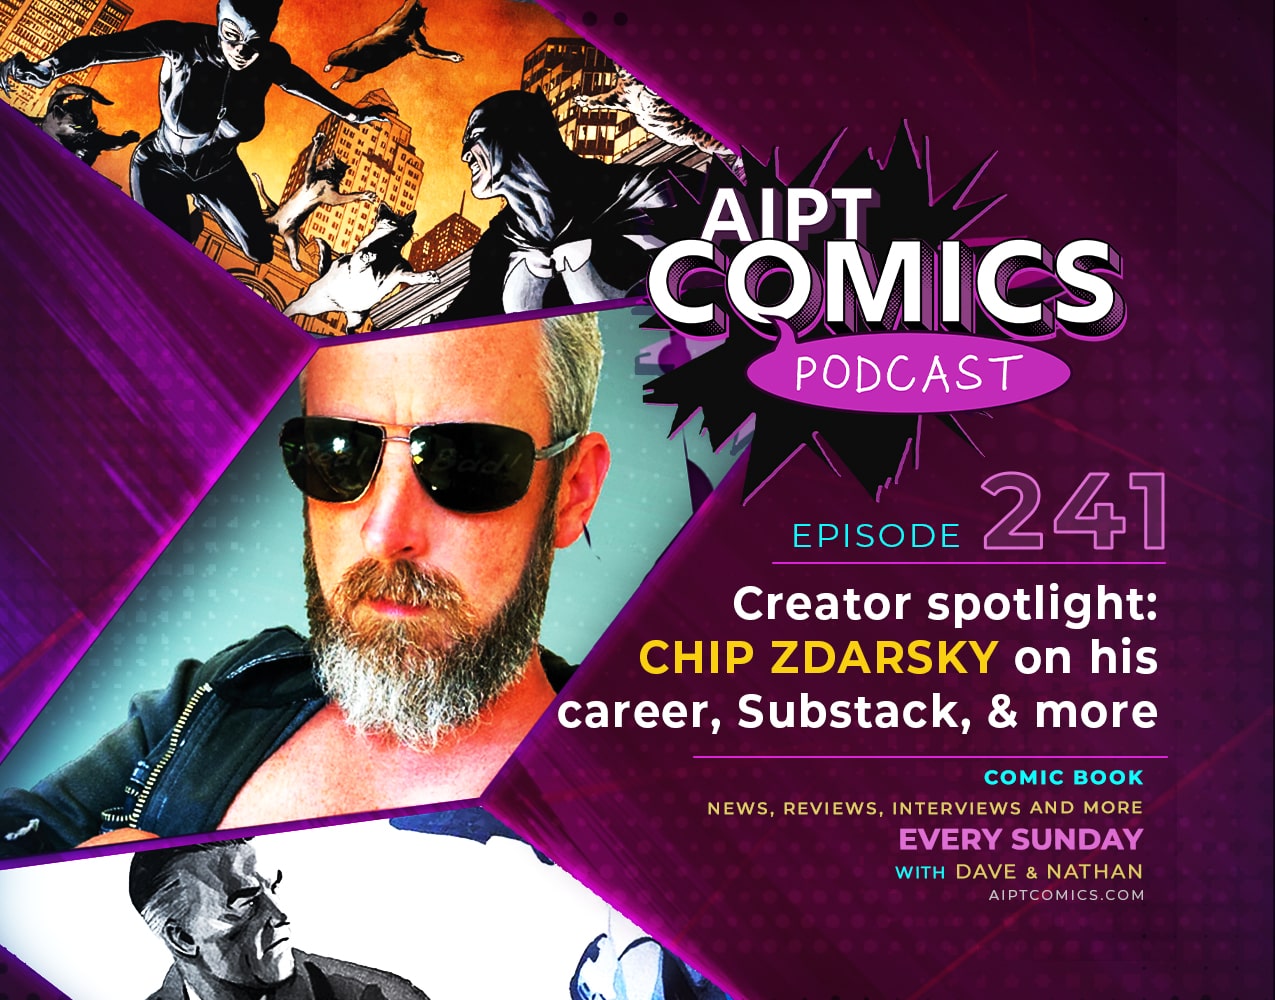 AIPT Comics Podcast episode 241: Creator spotlight: Chip Zdarsky on his career, Substack, & more